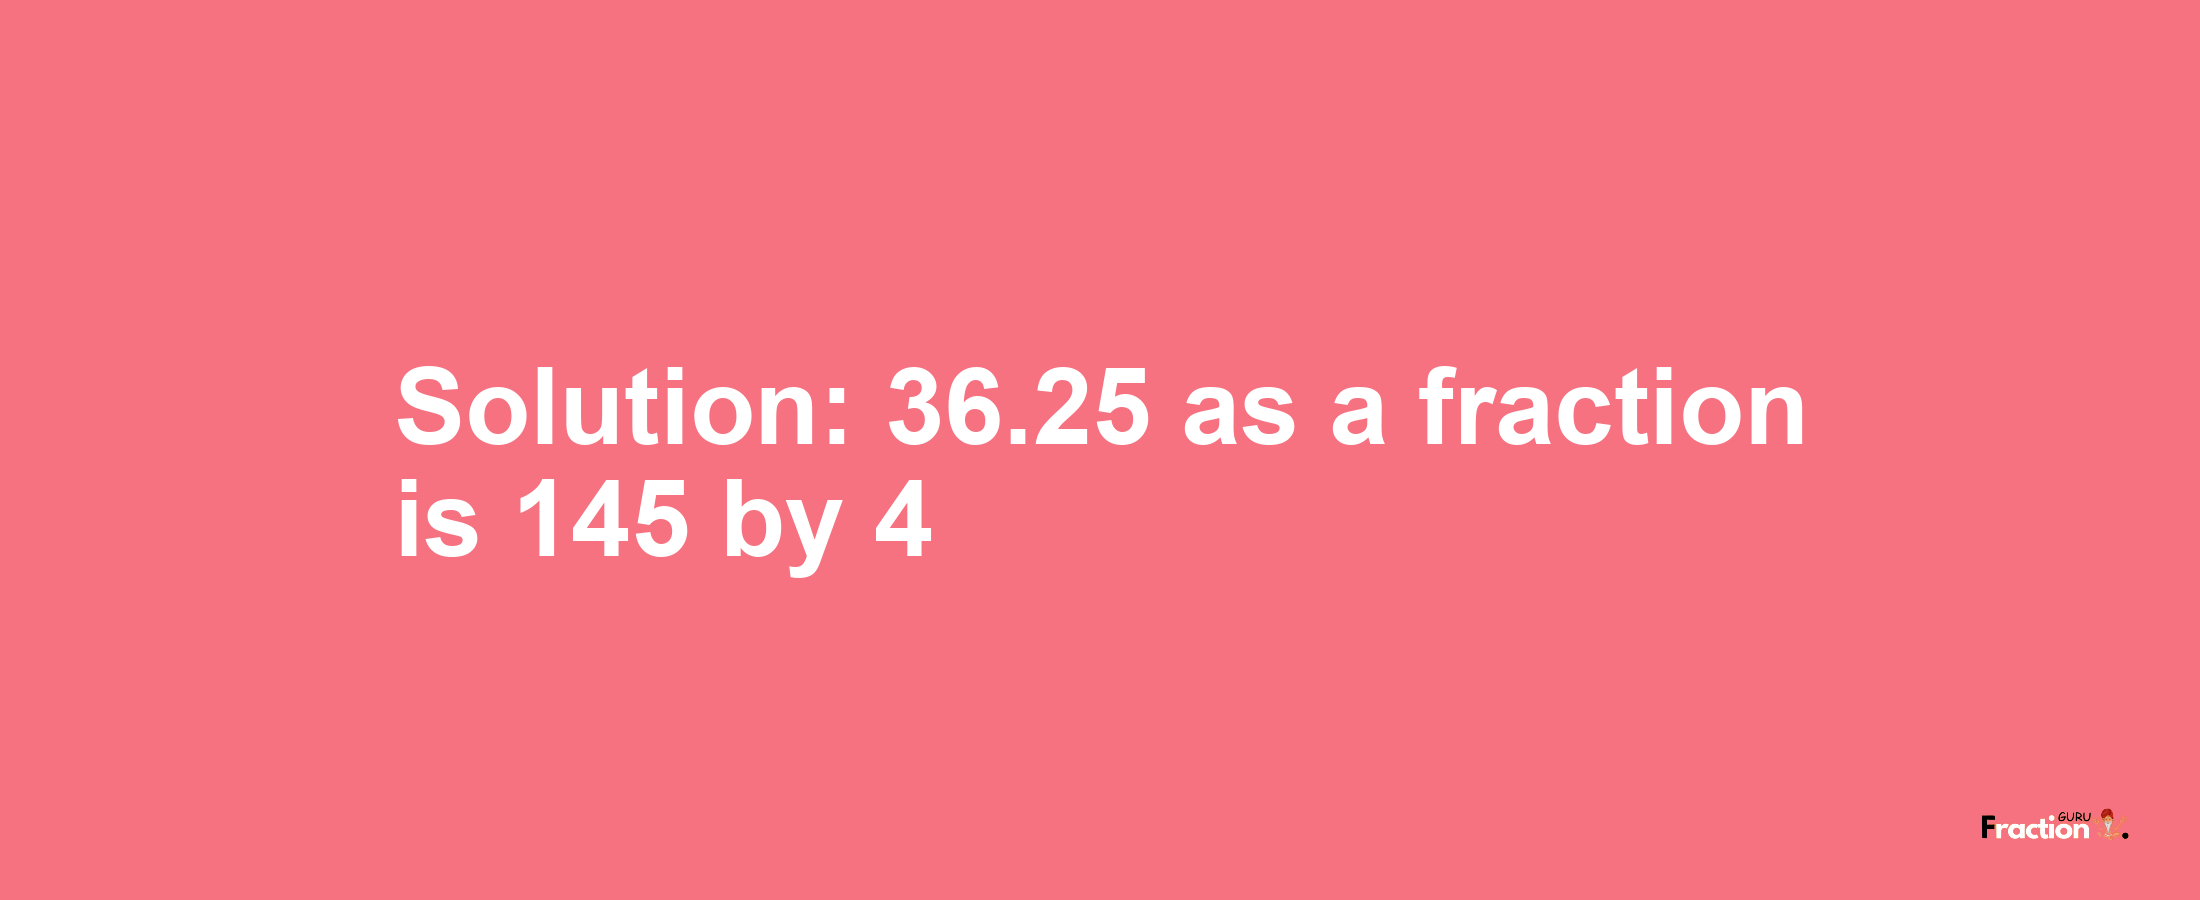 Solution:36.25 as a fraction is 145/4